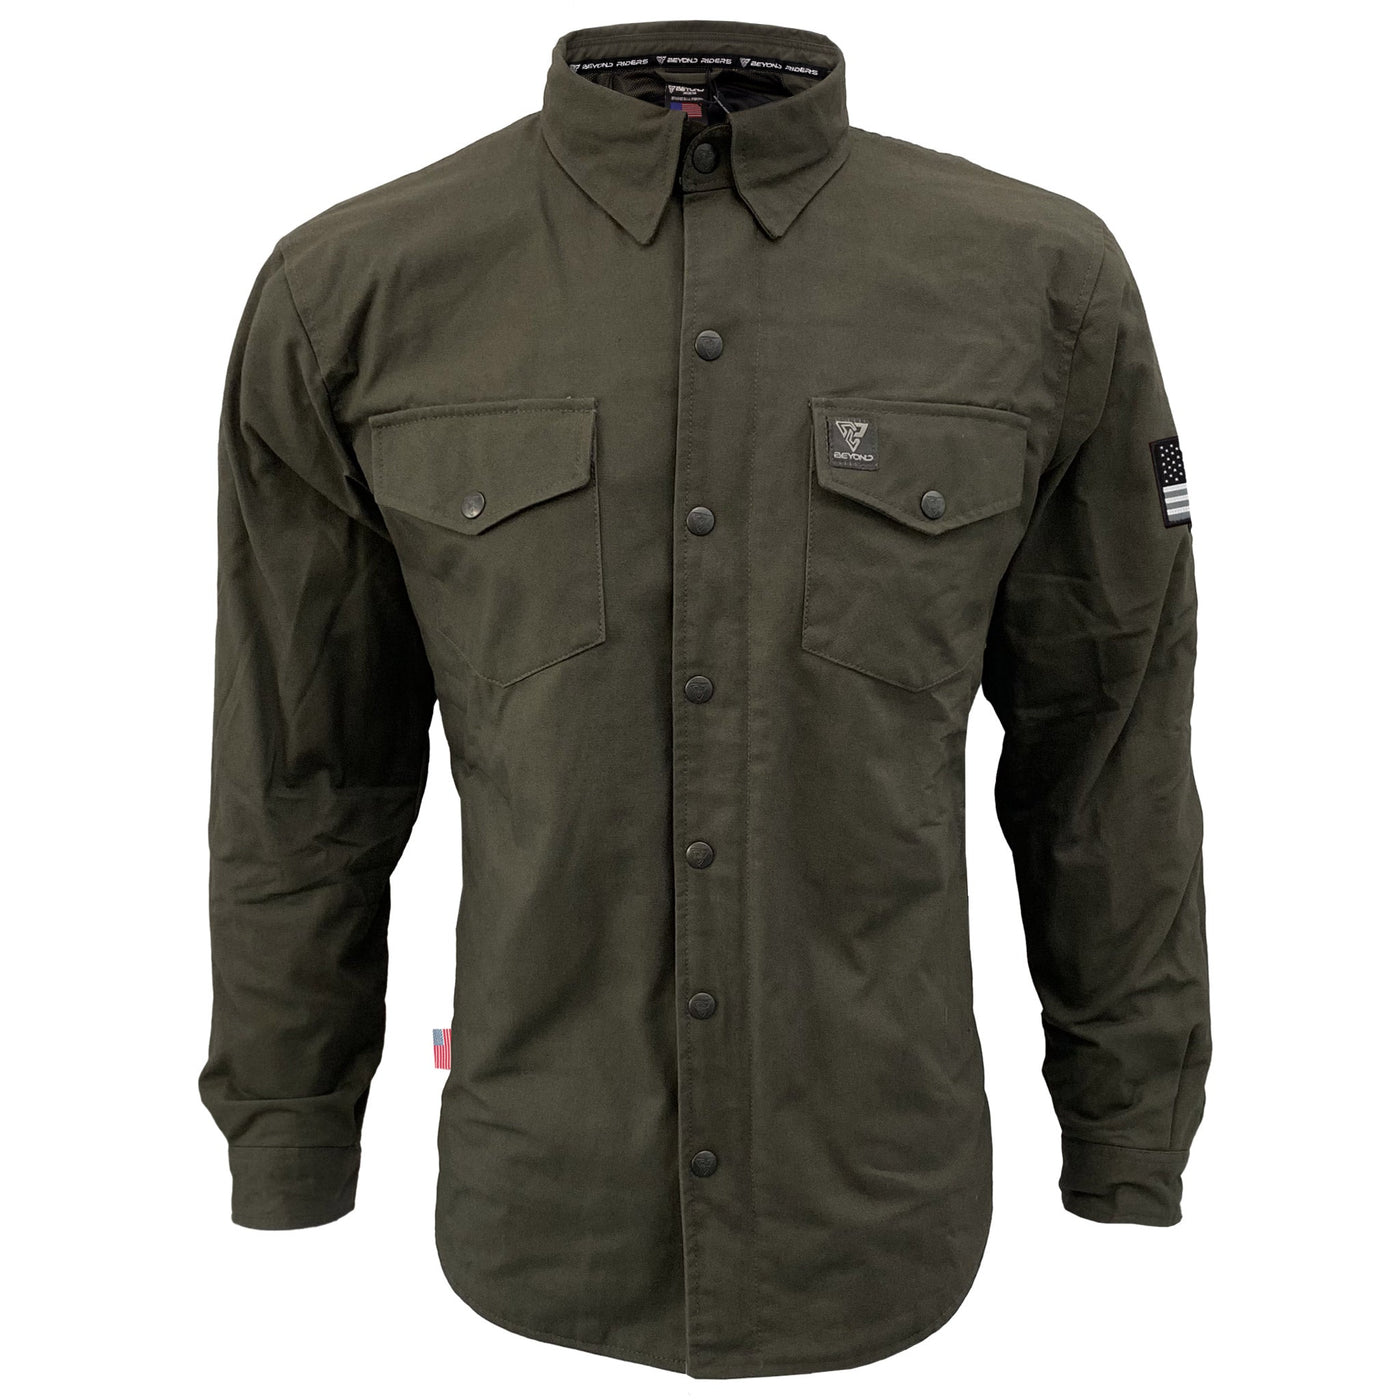 Protective Canvas Jacket with Pads for Men - Army Green